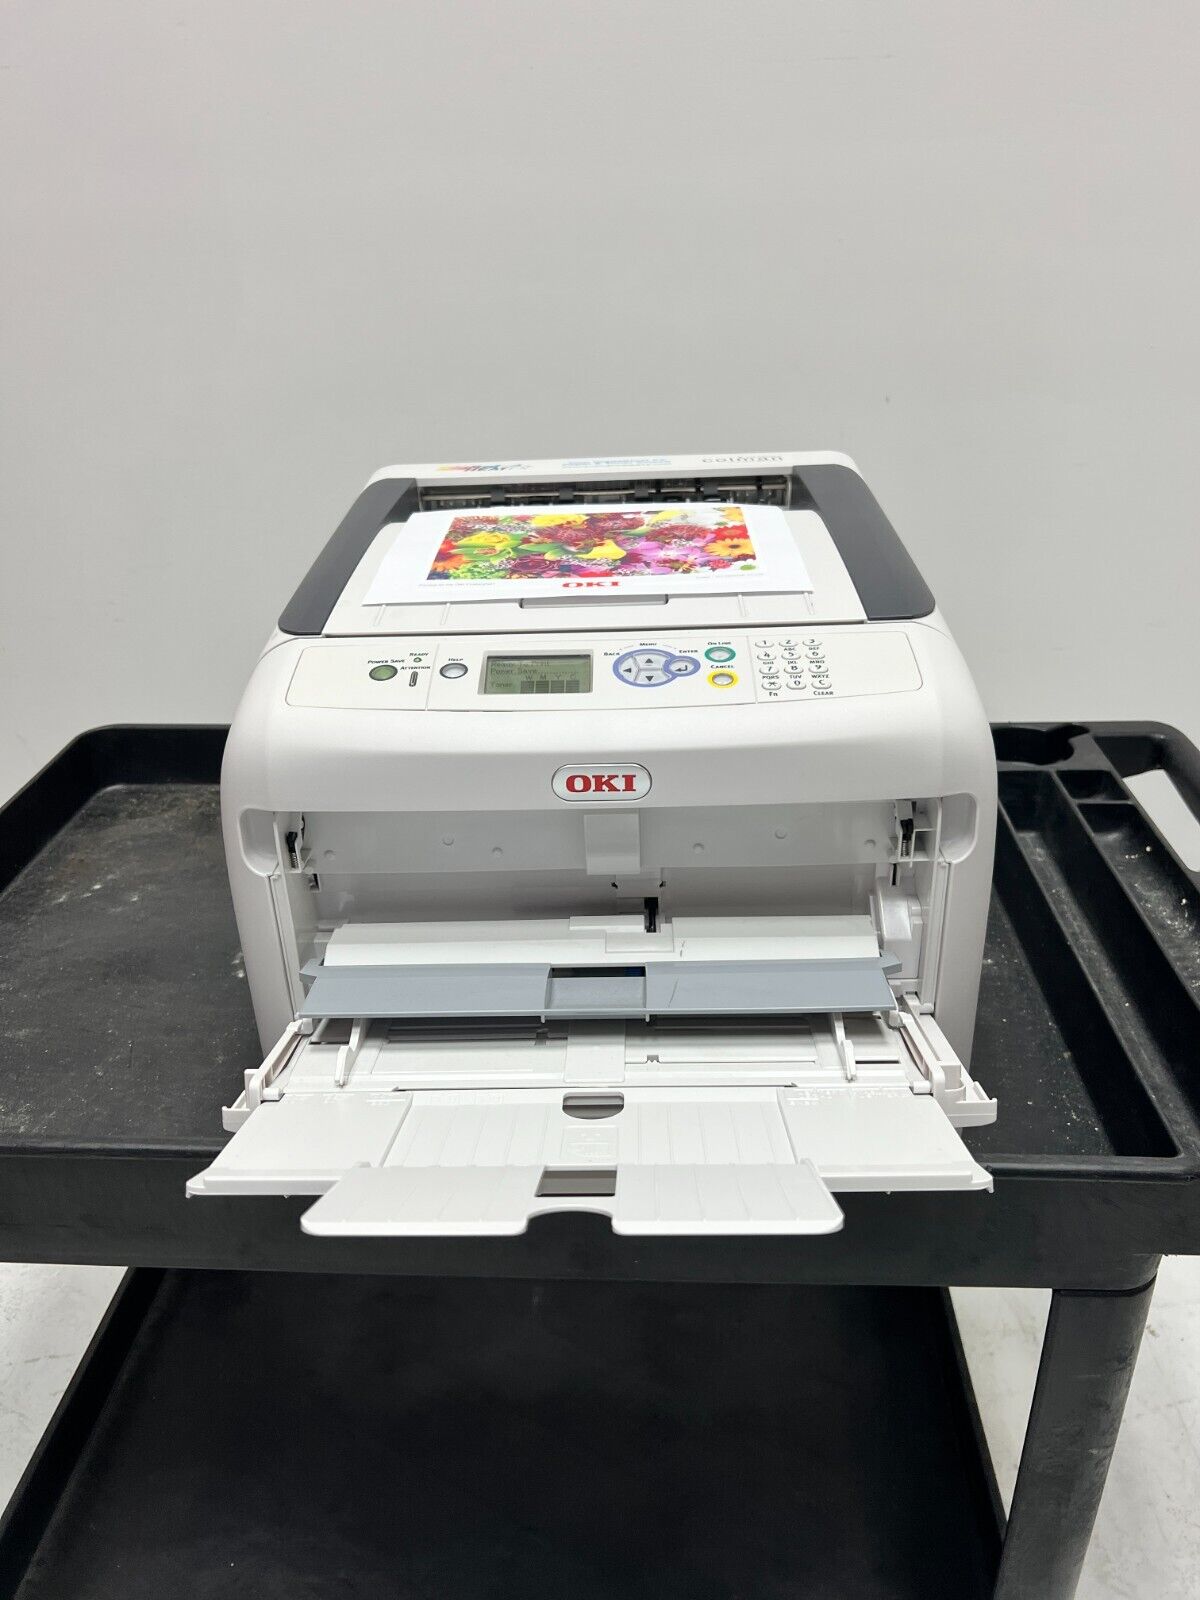 NEW OKI PRO8432WT White toner printer with RIP Software and license key/dongle